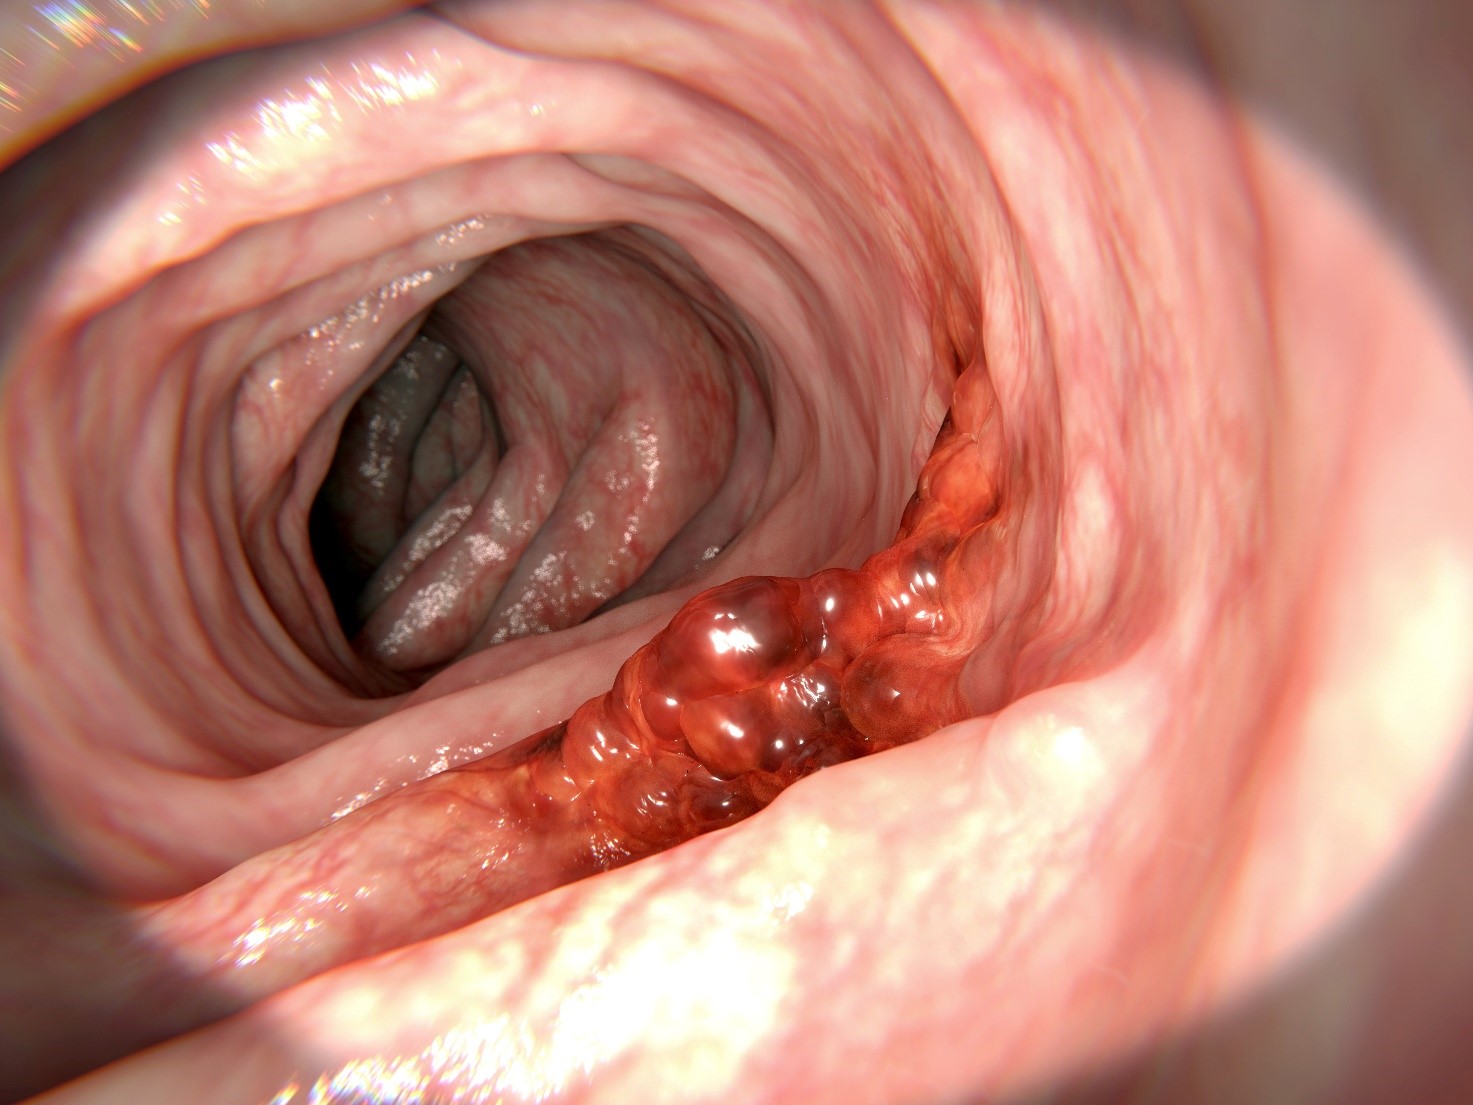 Colonoscopy and preview of findings